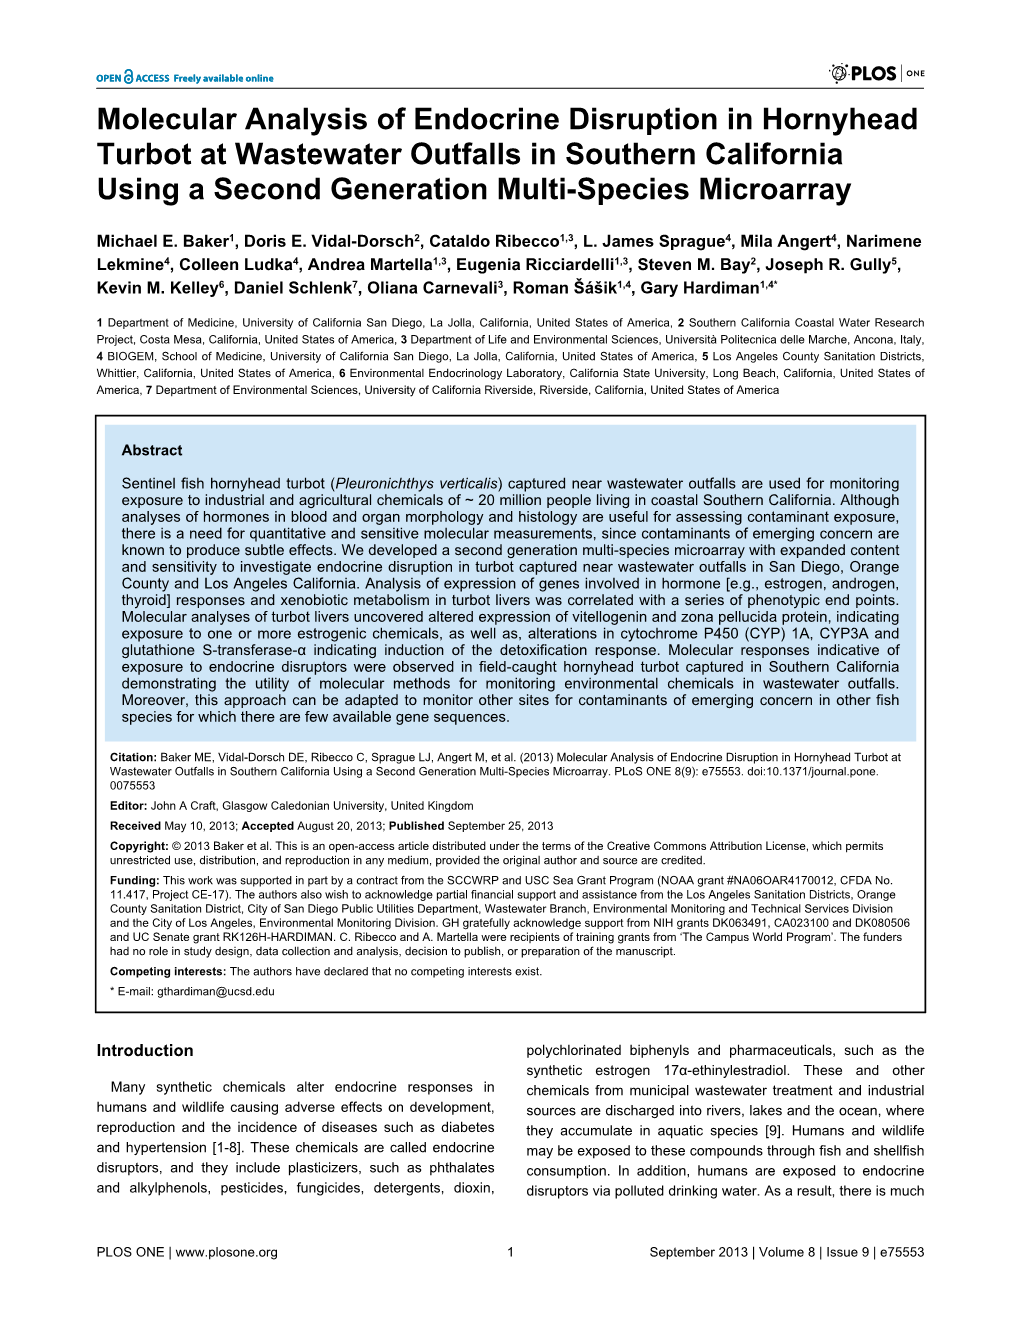 Molecular Analysis of Endocrine Disruption in Hornyhead Turbot at Wastewater Outfalls in Southern California Using a Second Generation Multi-Species Microarray